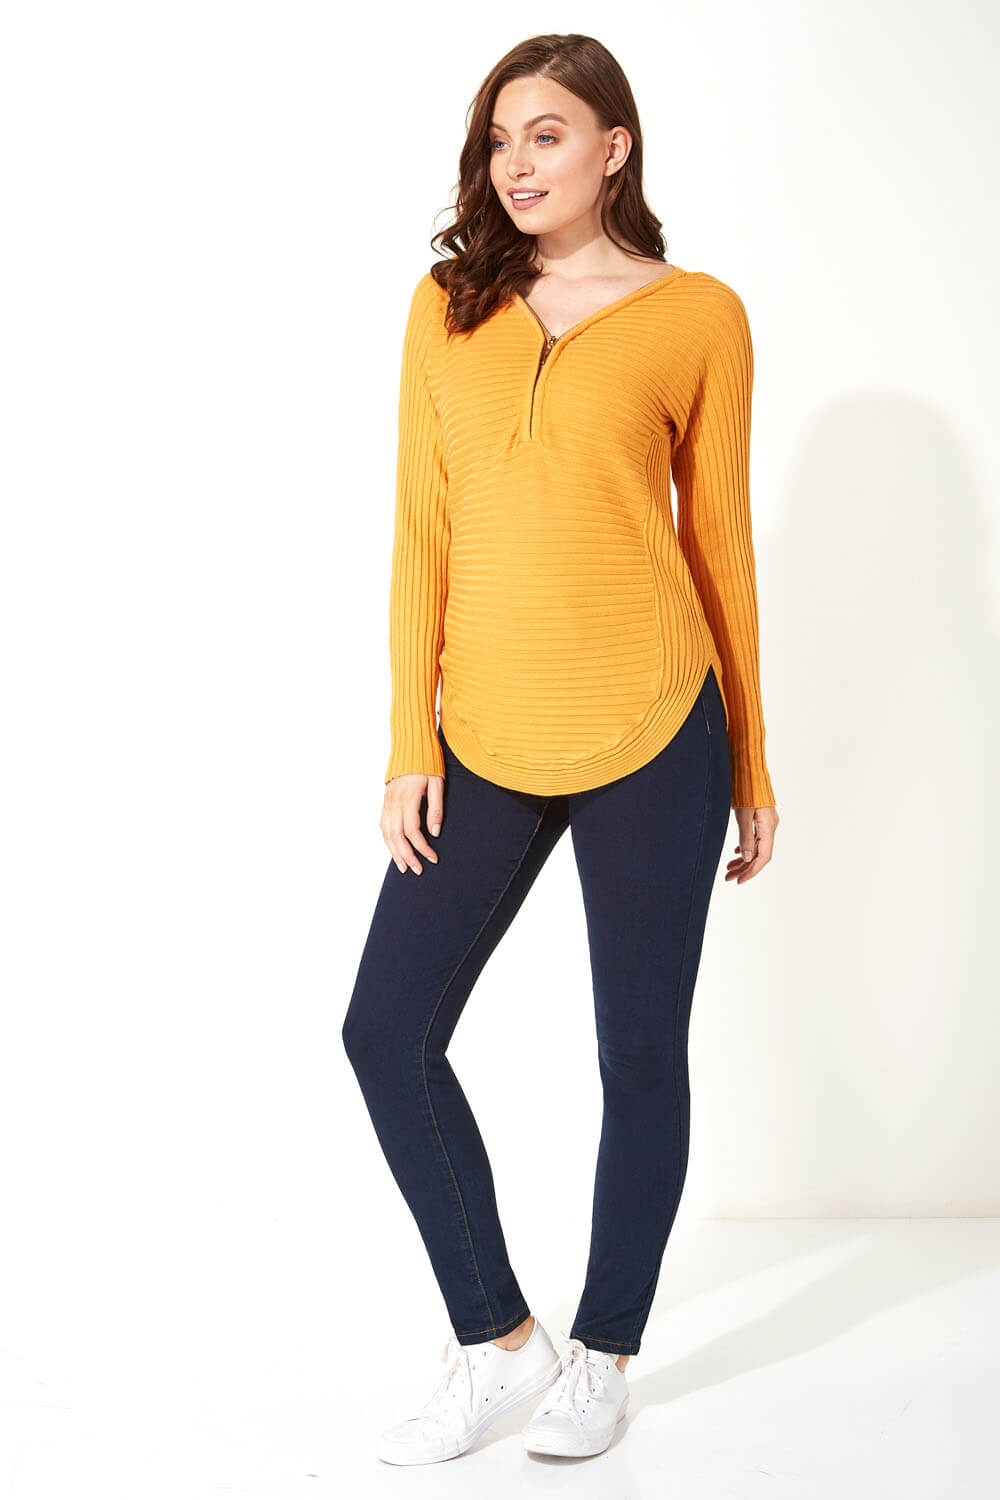 Gold Zip Front V Neck Jersey Long Sleeve Top, Image 2 of 5